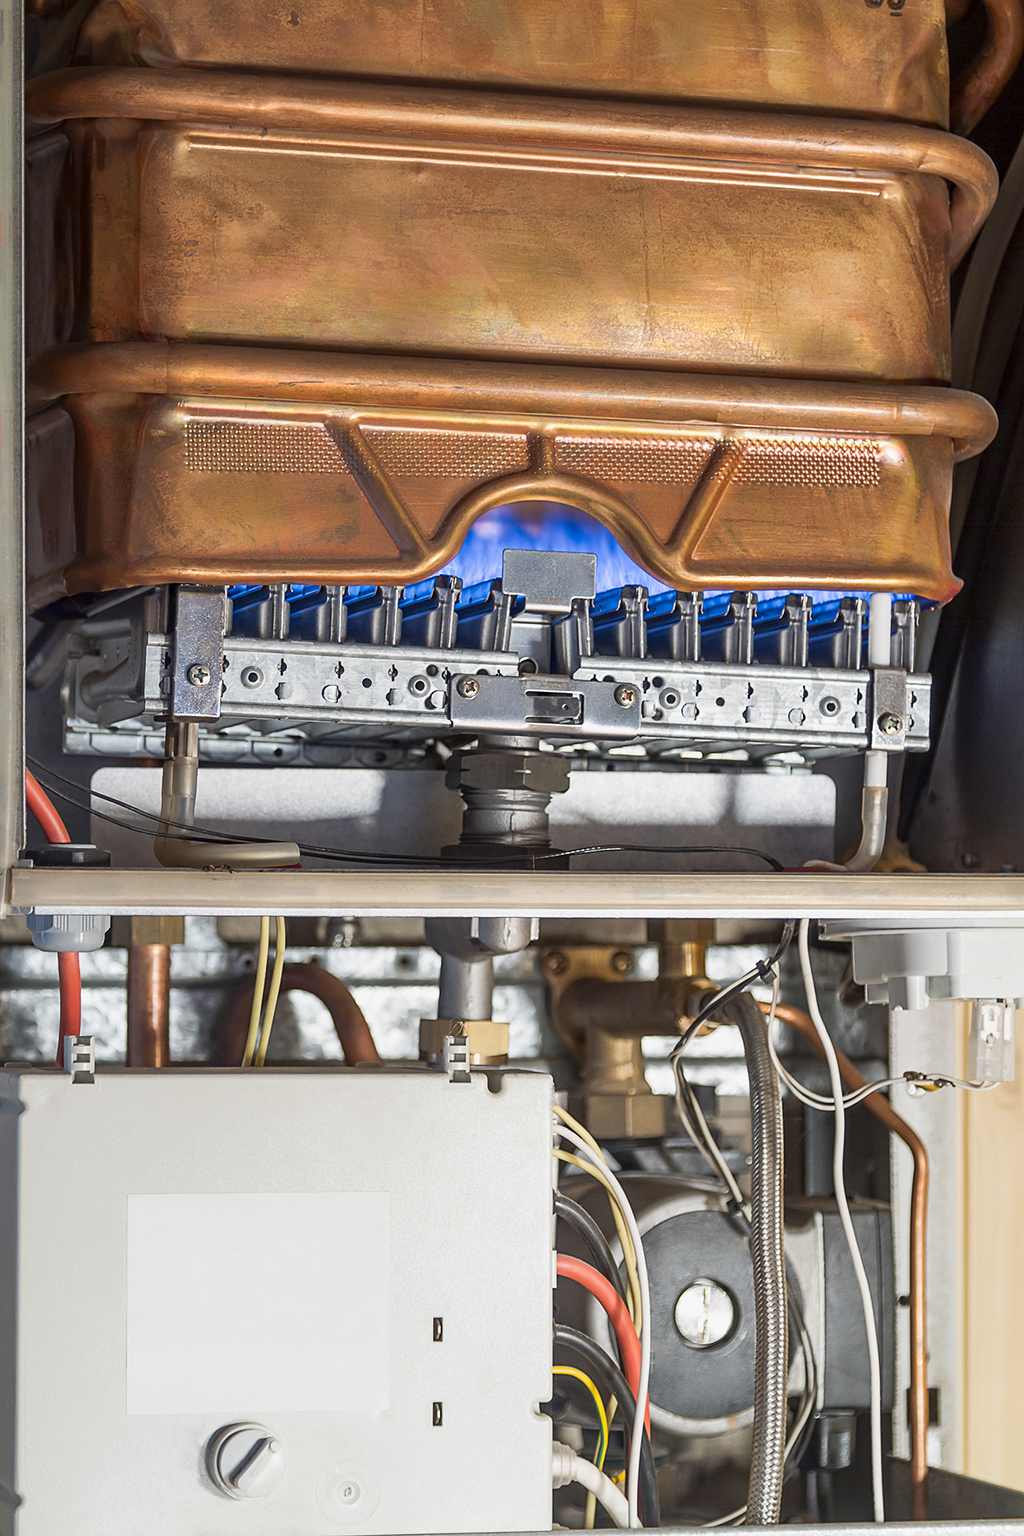 Tankless Water Heater Repair: What Can Go Wrong With Your Tankless Water Heater And What To Do About It | Irving, TX